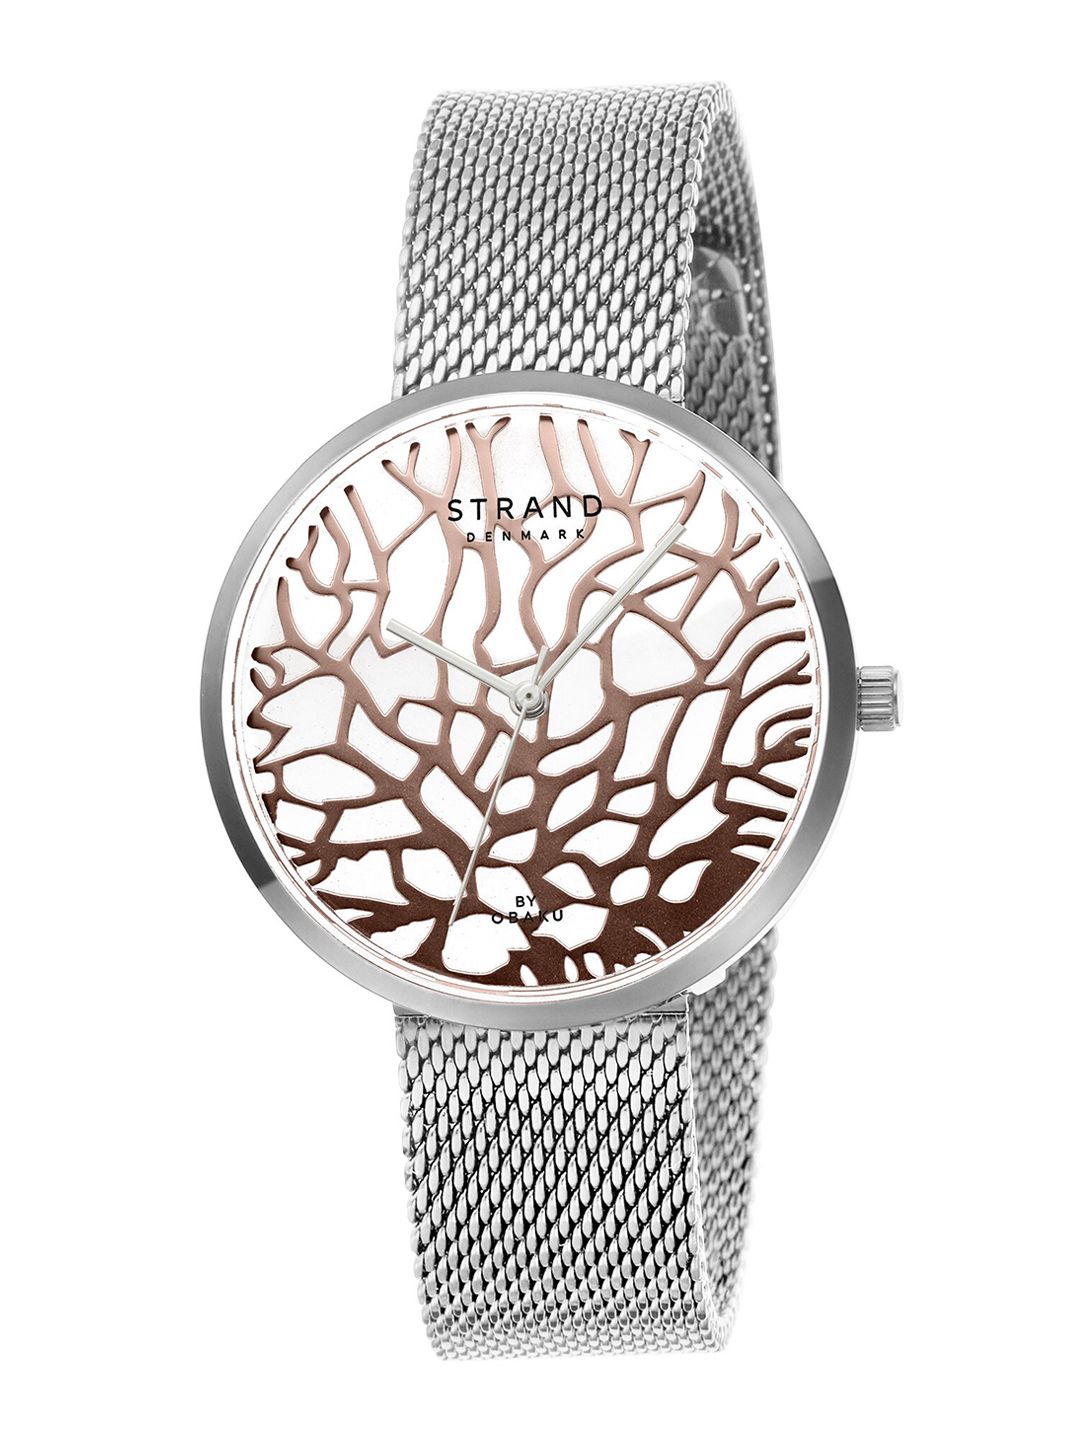 STRAND BY OBAKU Women Silver-Toned Bracelet Style Analogue Watch S700LXCIMC Price in India